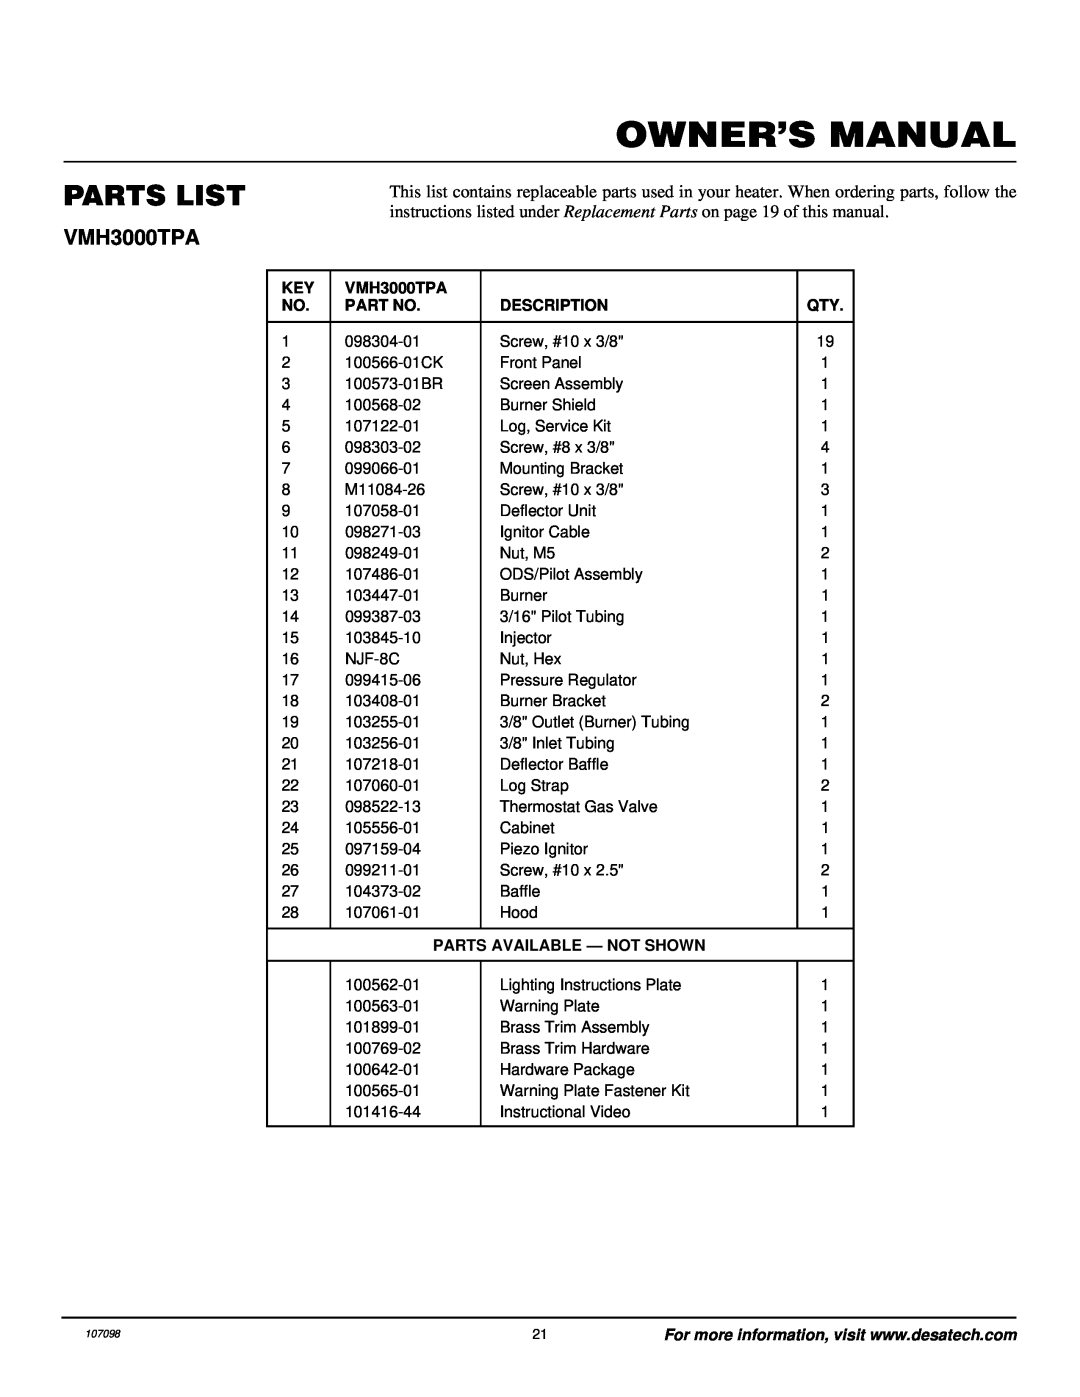 Vanguard Heating VMH3000TPA installation manual Parts List, Description, Parts Available - Not Shown 